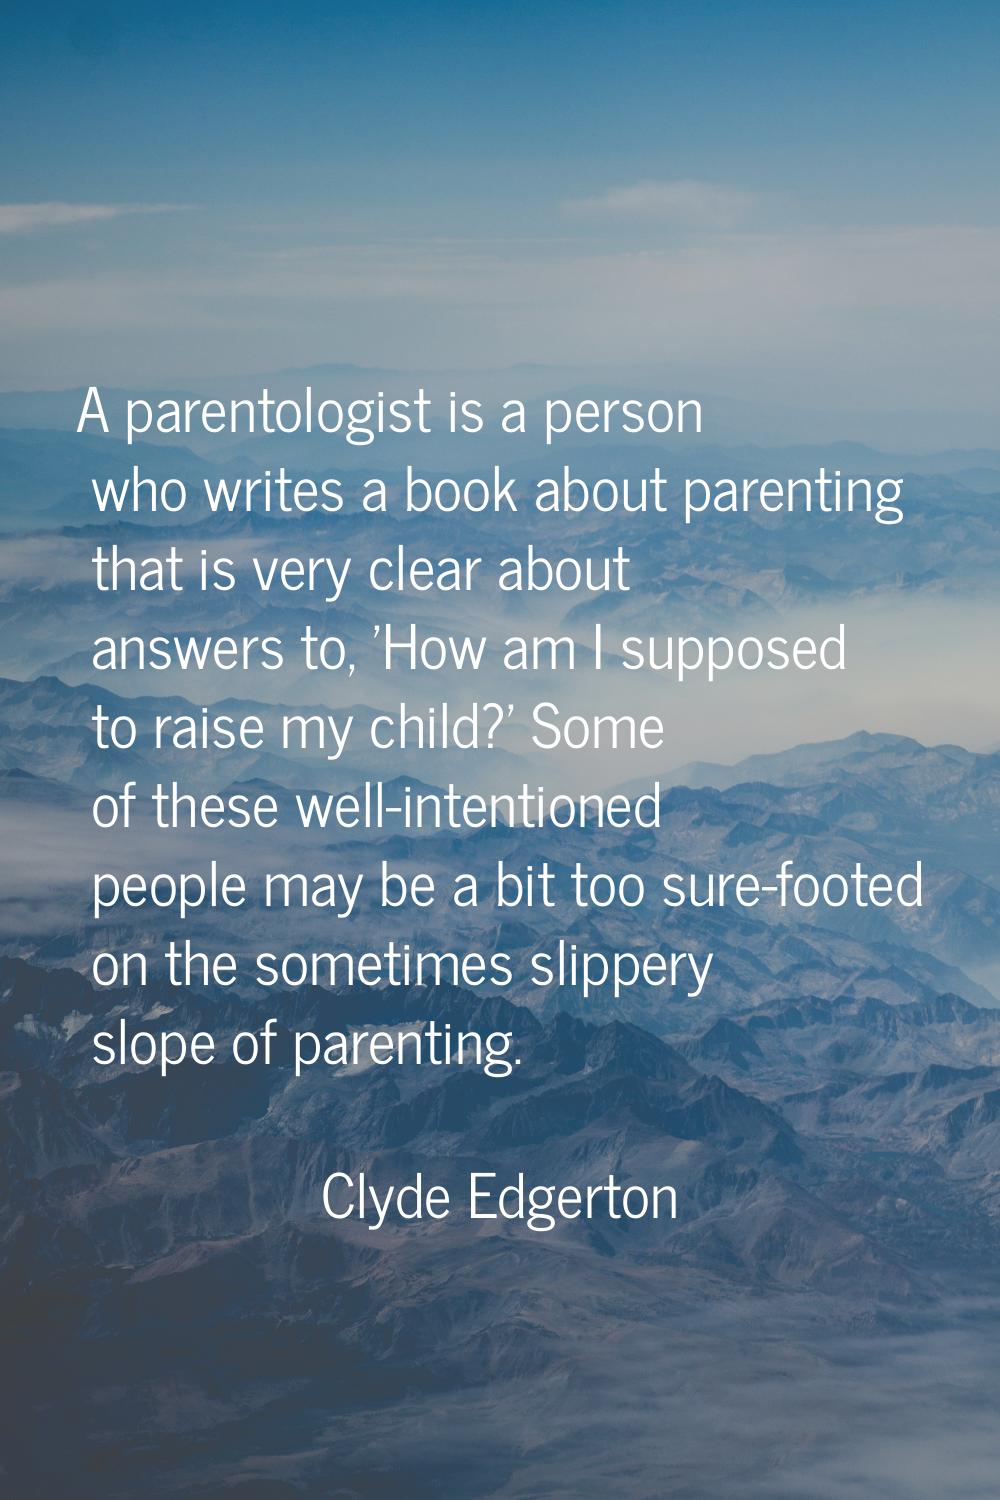 A parentologist is a person who writes a book about parenting that is very clear about answers to, 